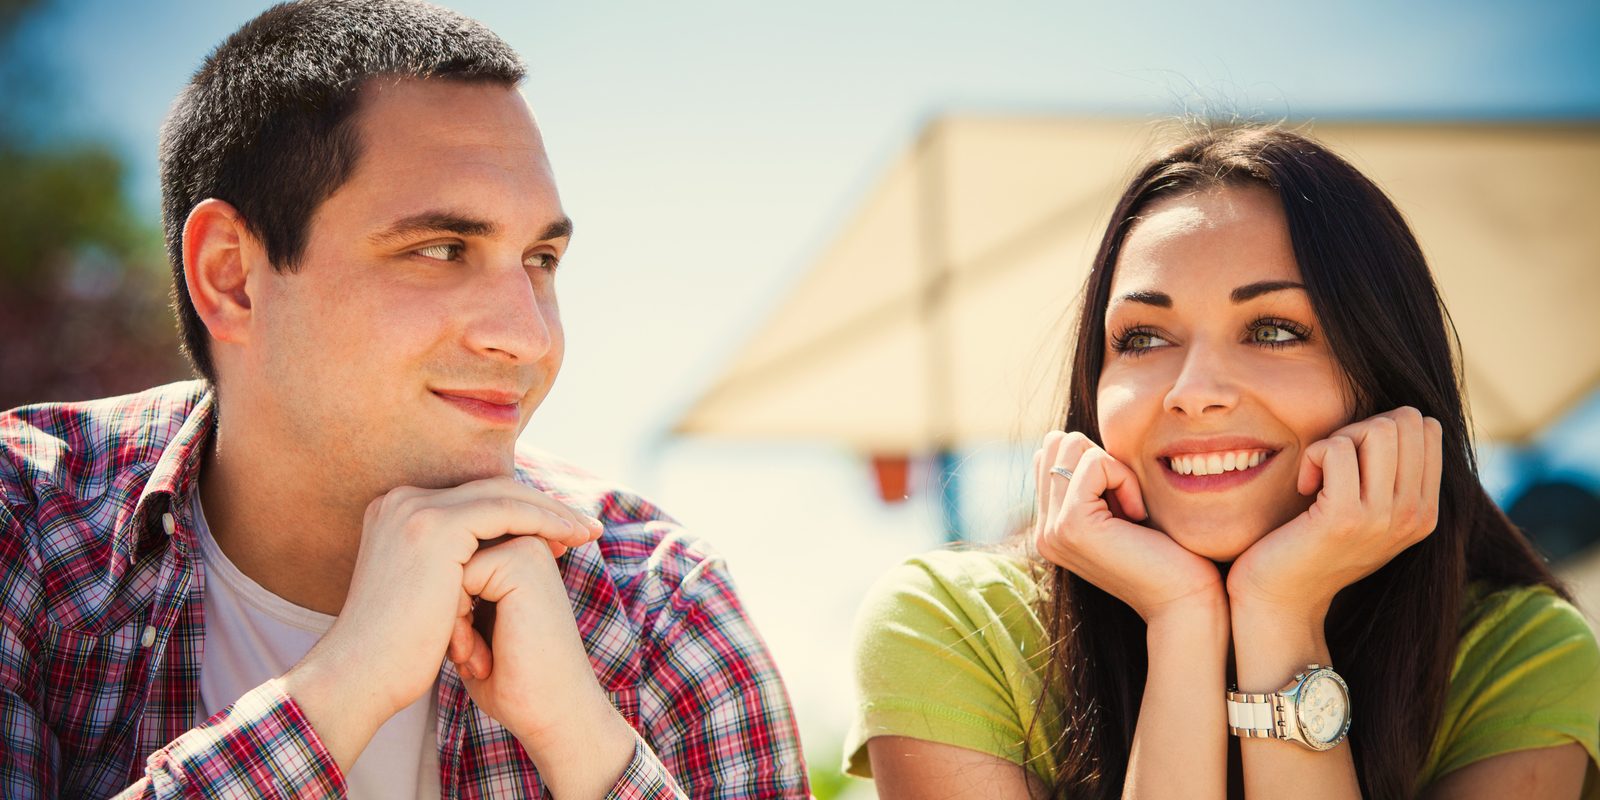 web2-young-couple-on-first-date-outdoor-shot-summer-day-shutterstock_140292490.jpg